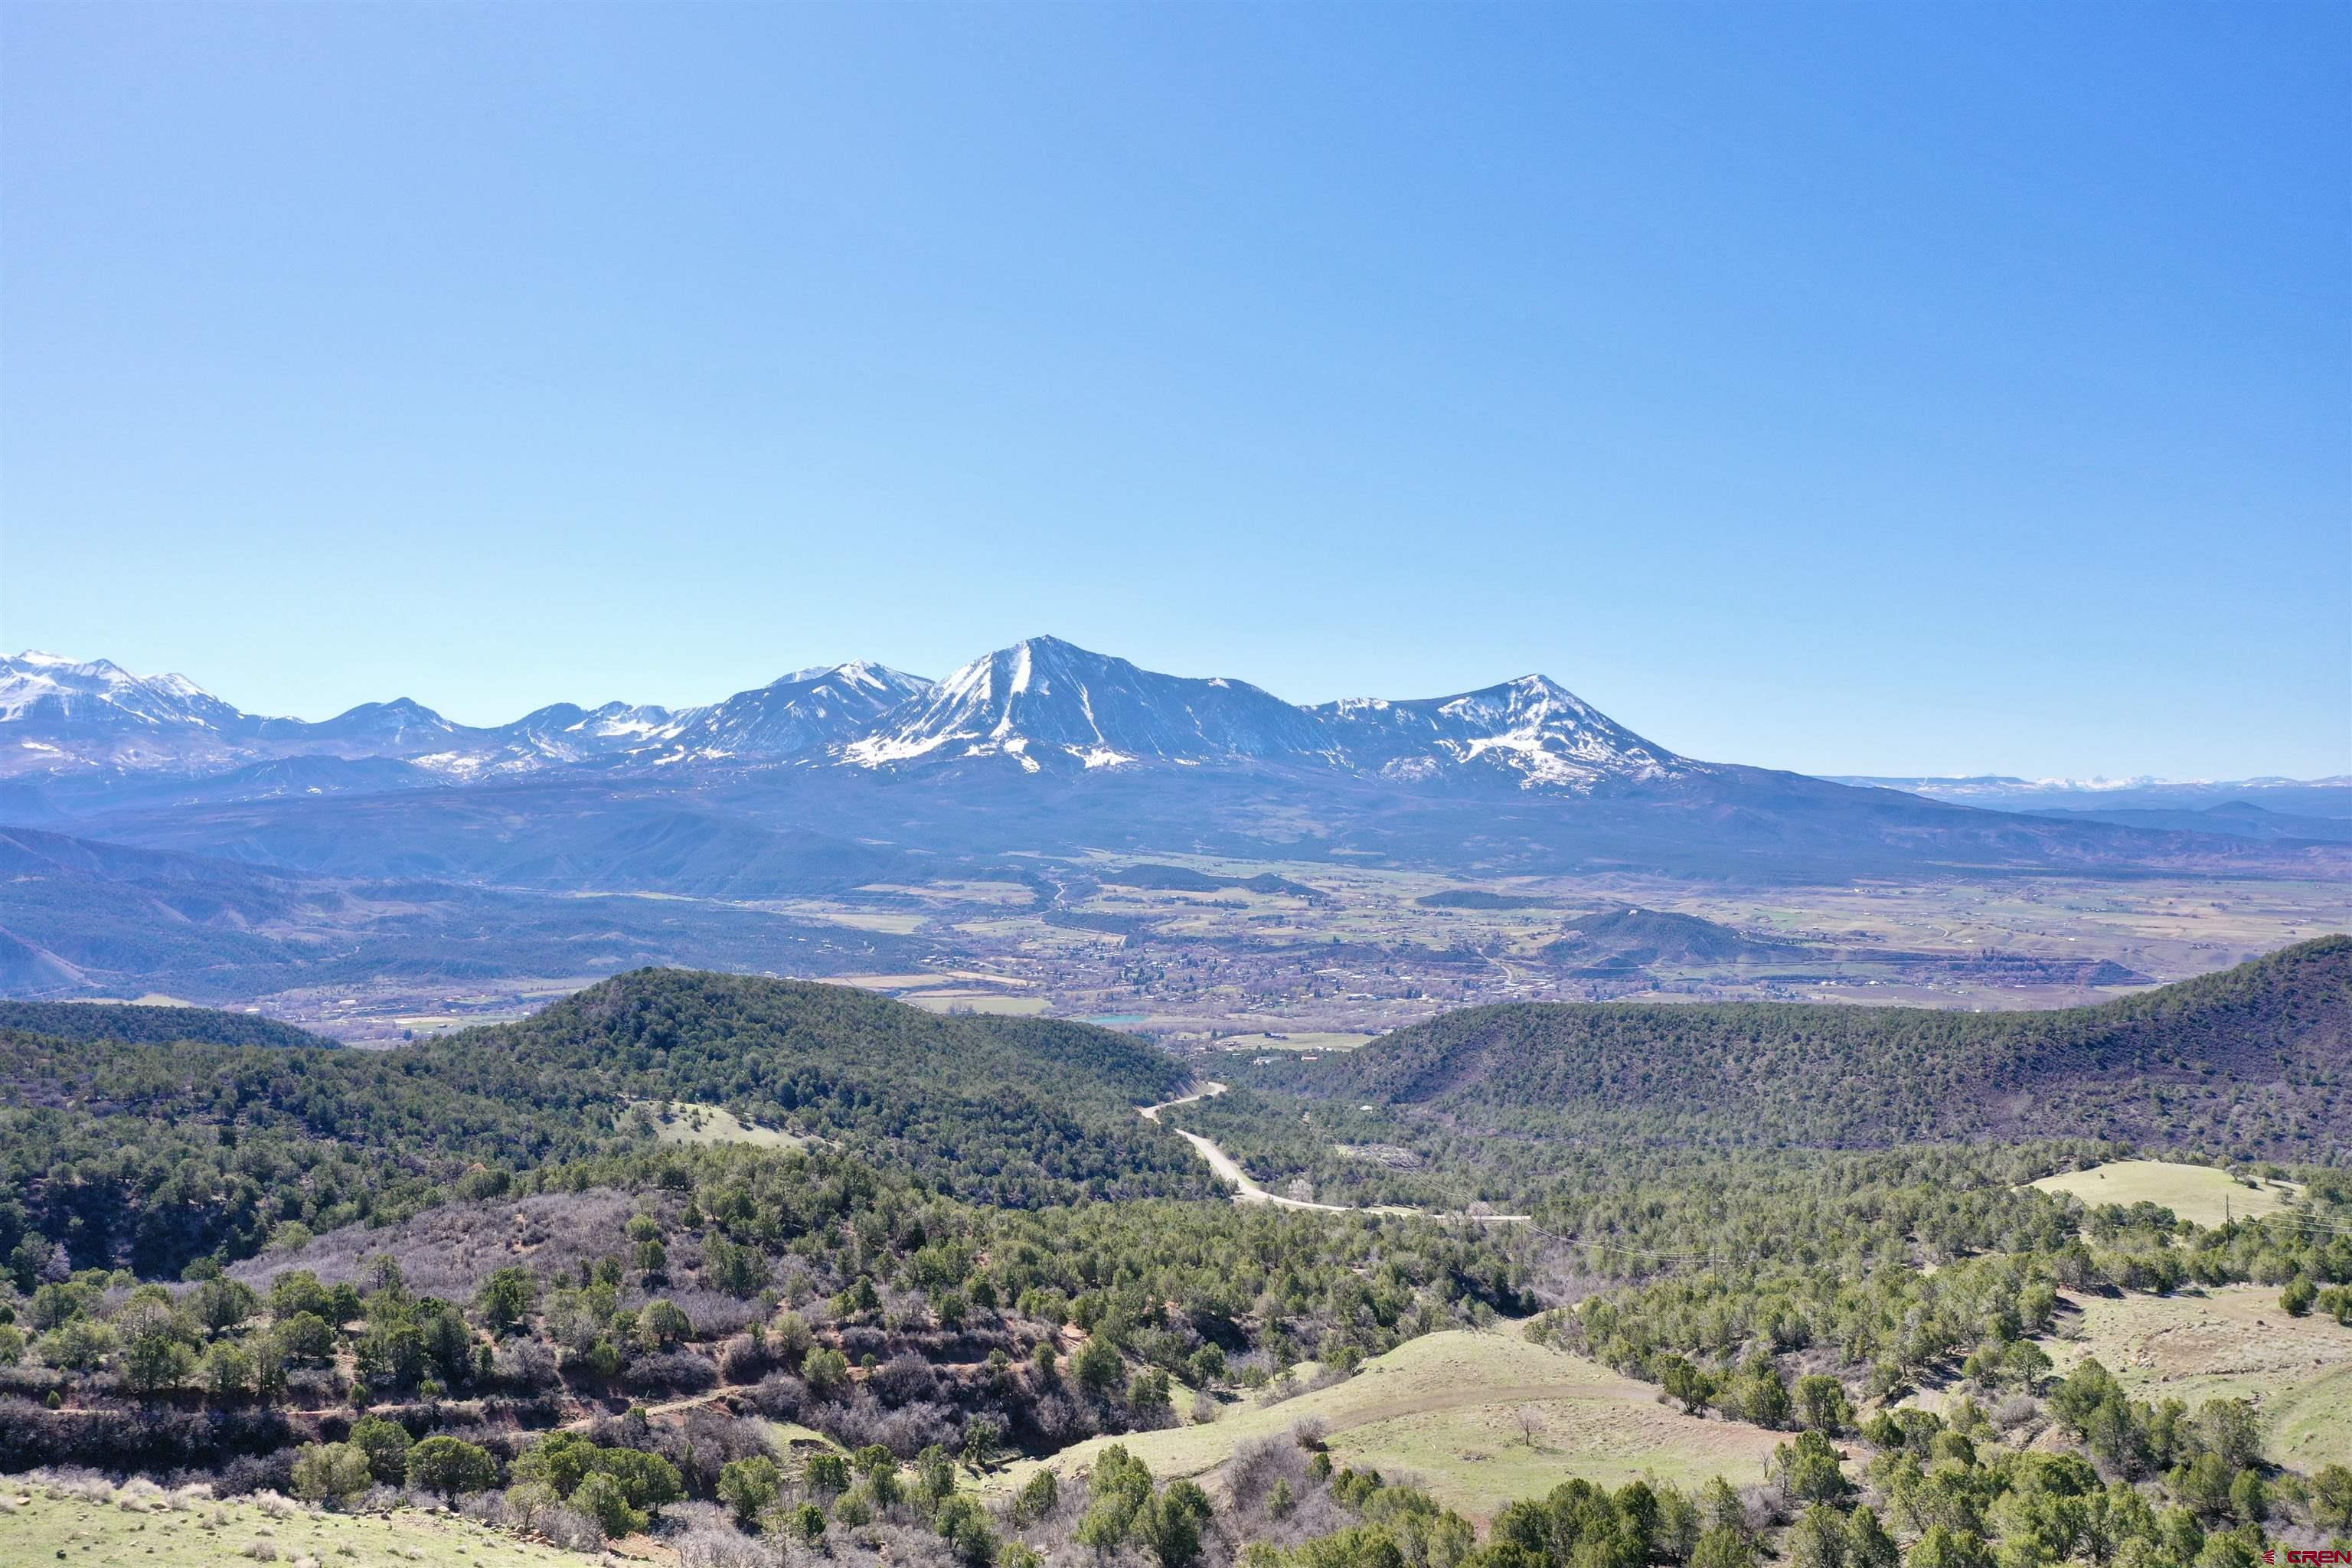 Come be inspired by this incredible 120 acre enclave perched above the picturesque town of Paonia, CO. This property has boundless potential- whether it be a stunning custom home site, a solar farm, a new development, or simply a place to retreat from the everyday world, this is it. The sloping topography varies from steep to rolling hills, and there are numerous park-like benches that would make incredible building sites. There is not a spot on the property that doesn't highlight the massive North Fork view of not only Mt. Lamborn and Mt. Landsend, but also of the entirety of the West Elks, the Ragged Wilderness, and even down to thee stunning San Juans. Meander just 5 minutes up the paved Stevens Gulch road to a private gate to access the property. It is surrounded on all sides by BLM. This provides wonderful privacy and access to public lands. Rich in history, this property was once the site of the Westmoreland Mine, and has since been thoroughly reclaimed. There are so many options for the future of this property, and there is nowhere that provides such awe-inspiring views.